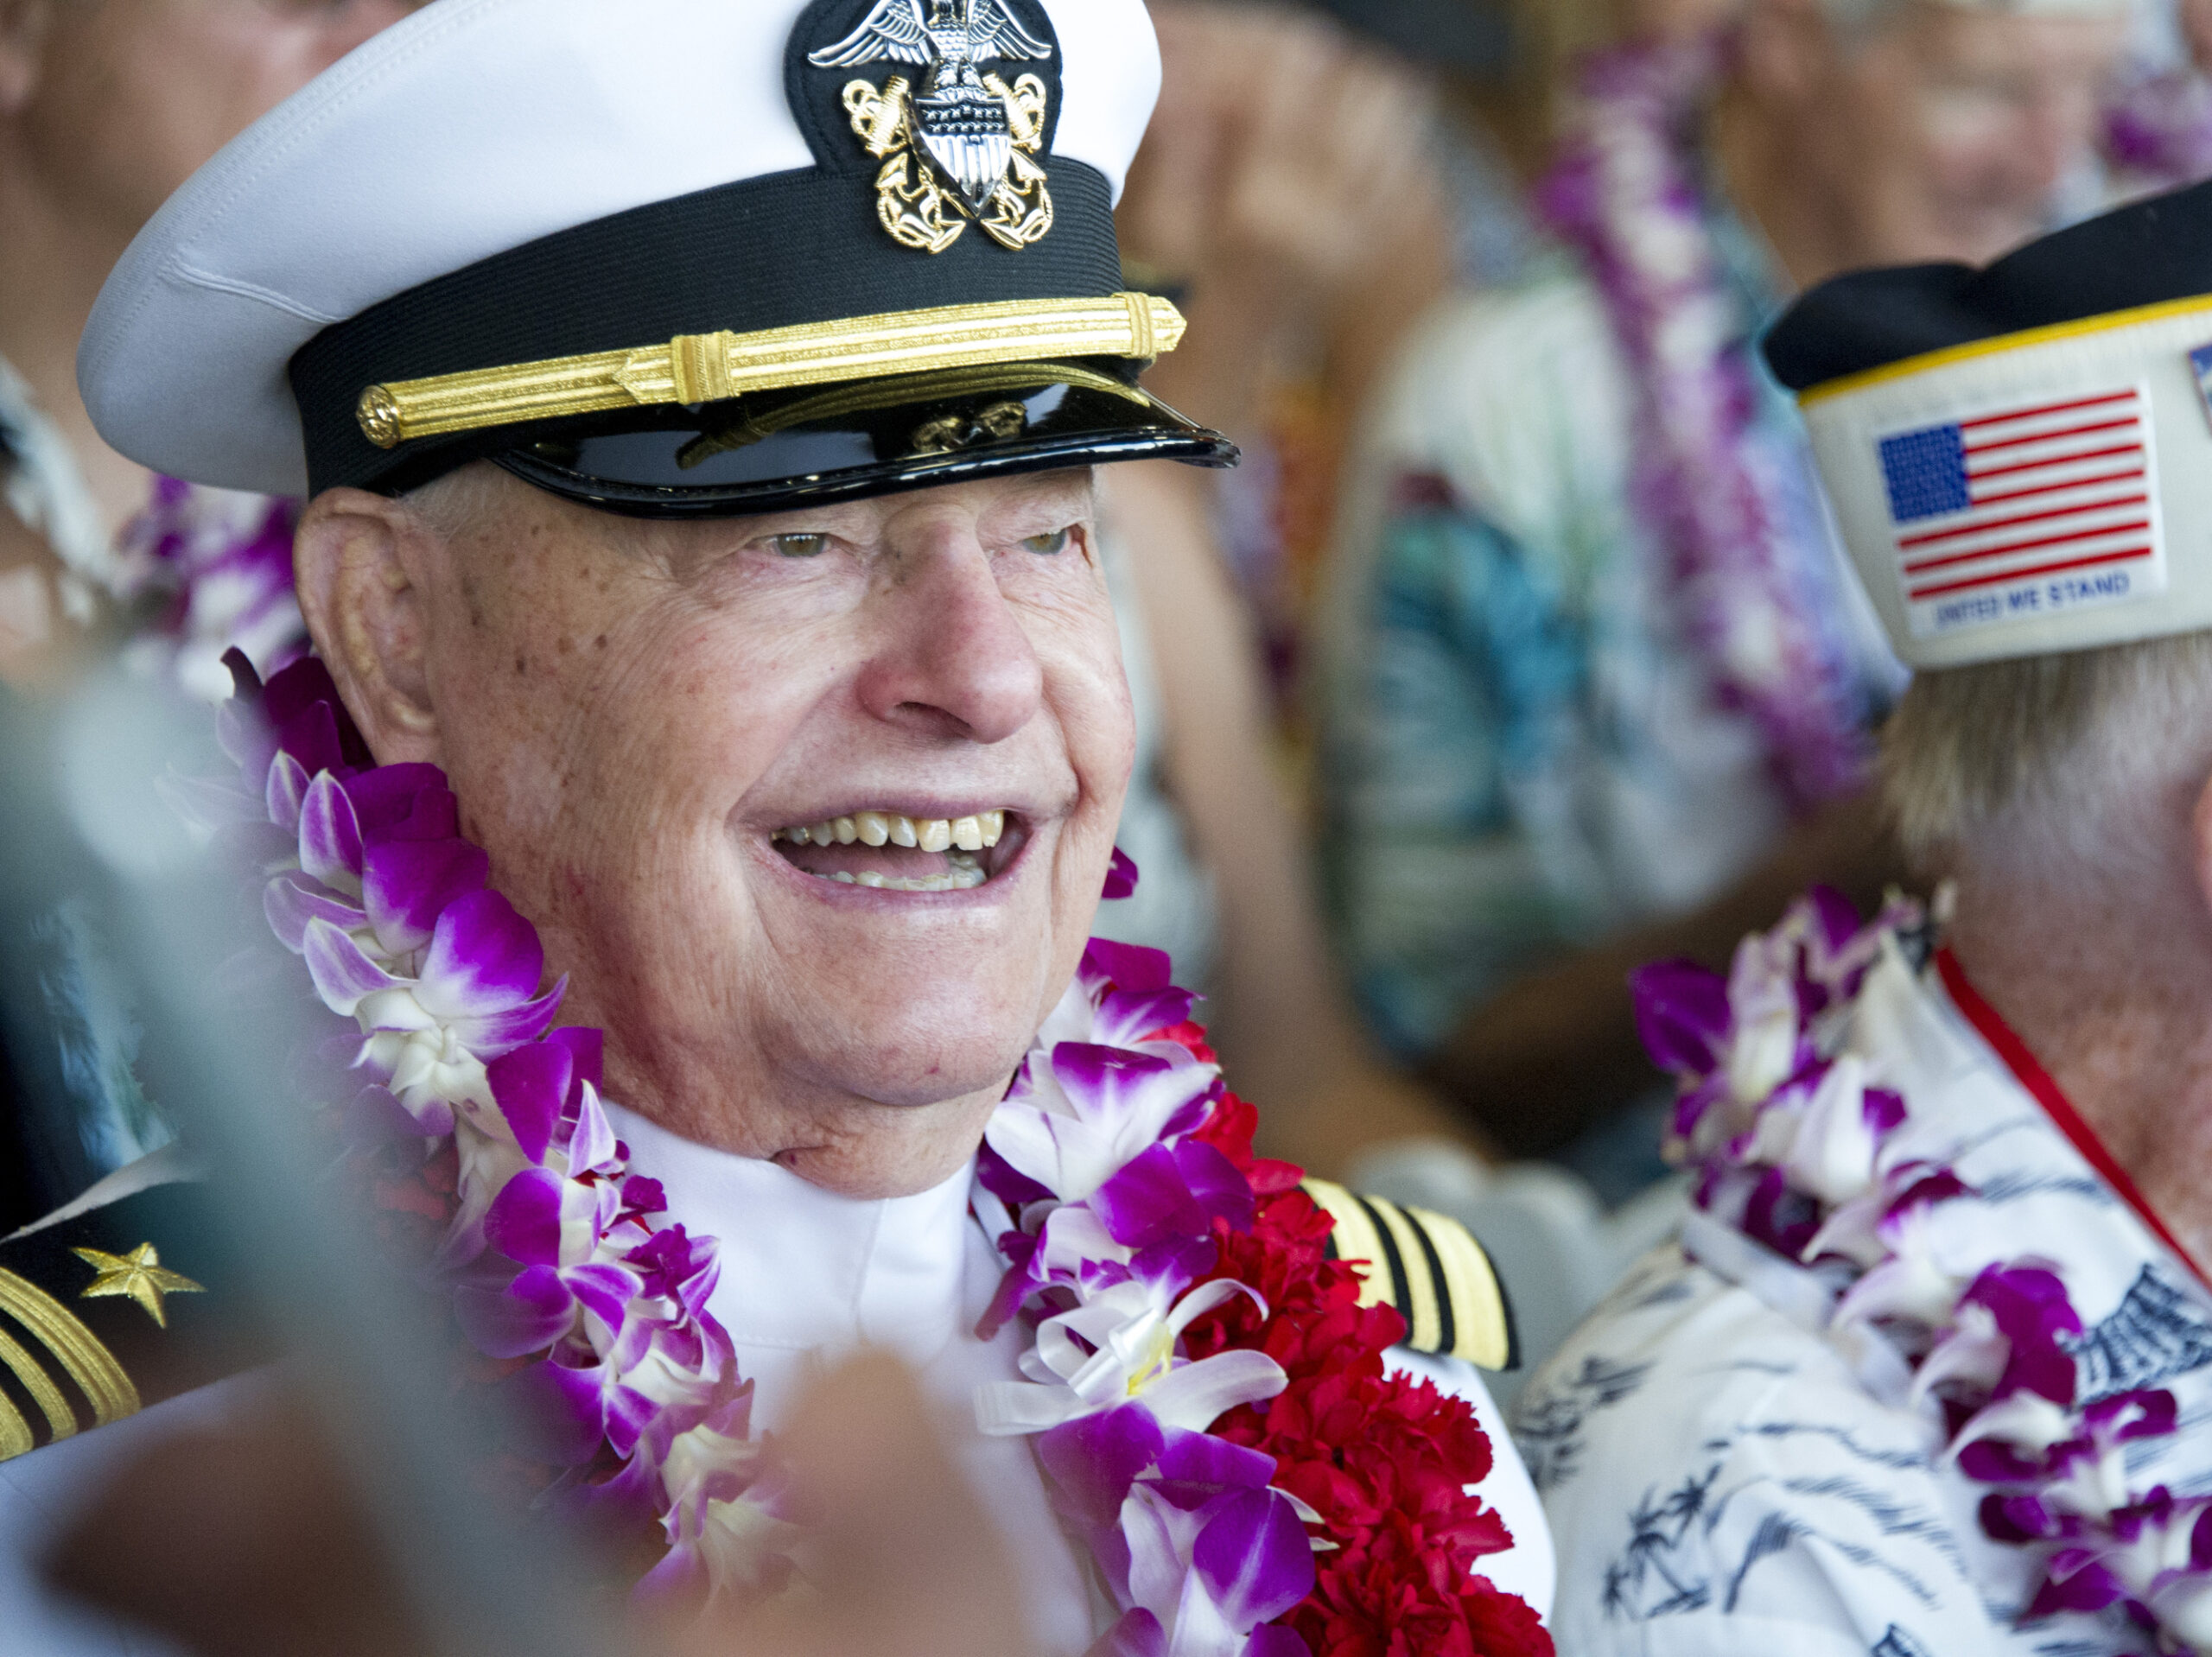 Lou Conter, pictured at the 75th anniversary of the Japanese attack on Pearl Harbor, in 2016, died on Monday. He was the last living survivor of the USS Arizona battleship that exploded and sank during the Japanese bombing of Pearl Harbor.